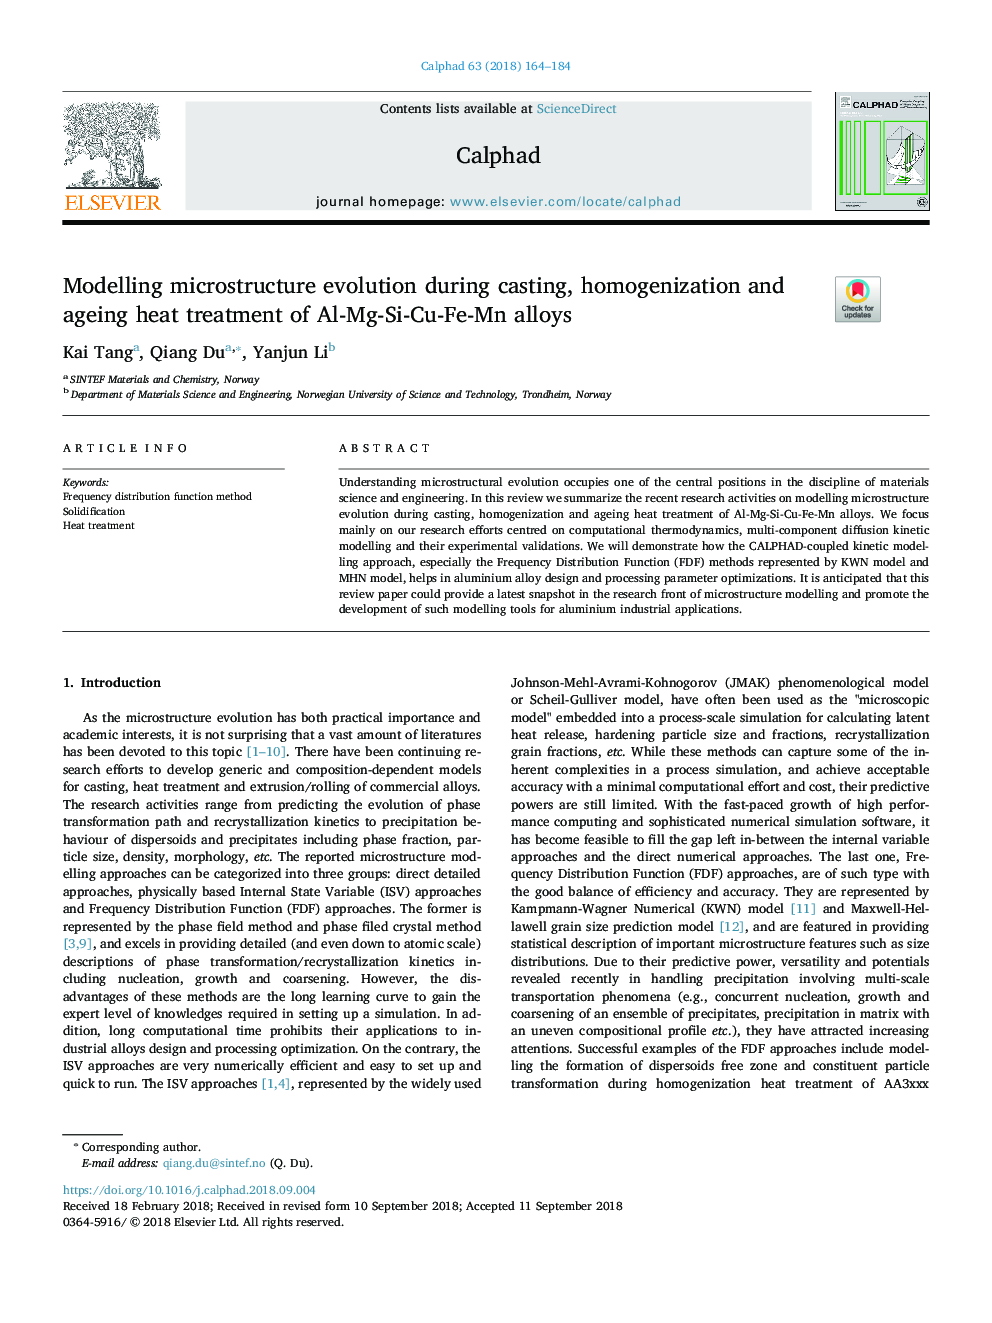 Modelling microstructure evolution during casting, homogenization and ageing heat treatment of Al-Mg-Si-Cu-Fe-Mn alloys